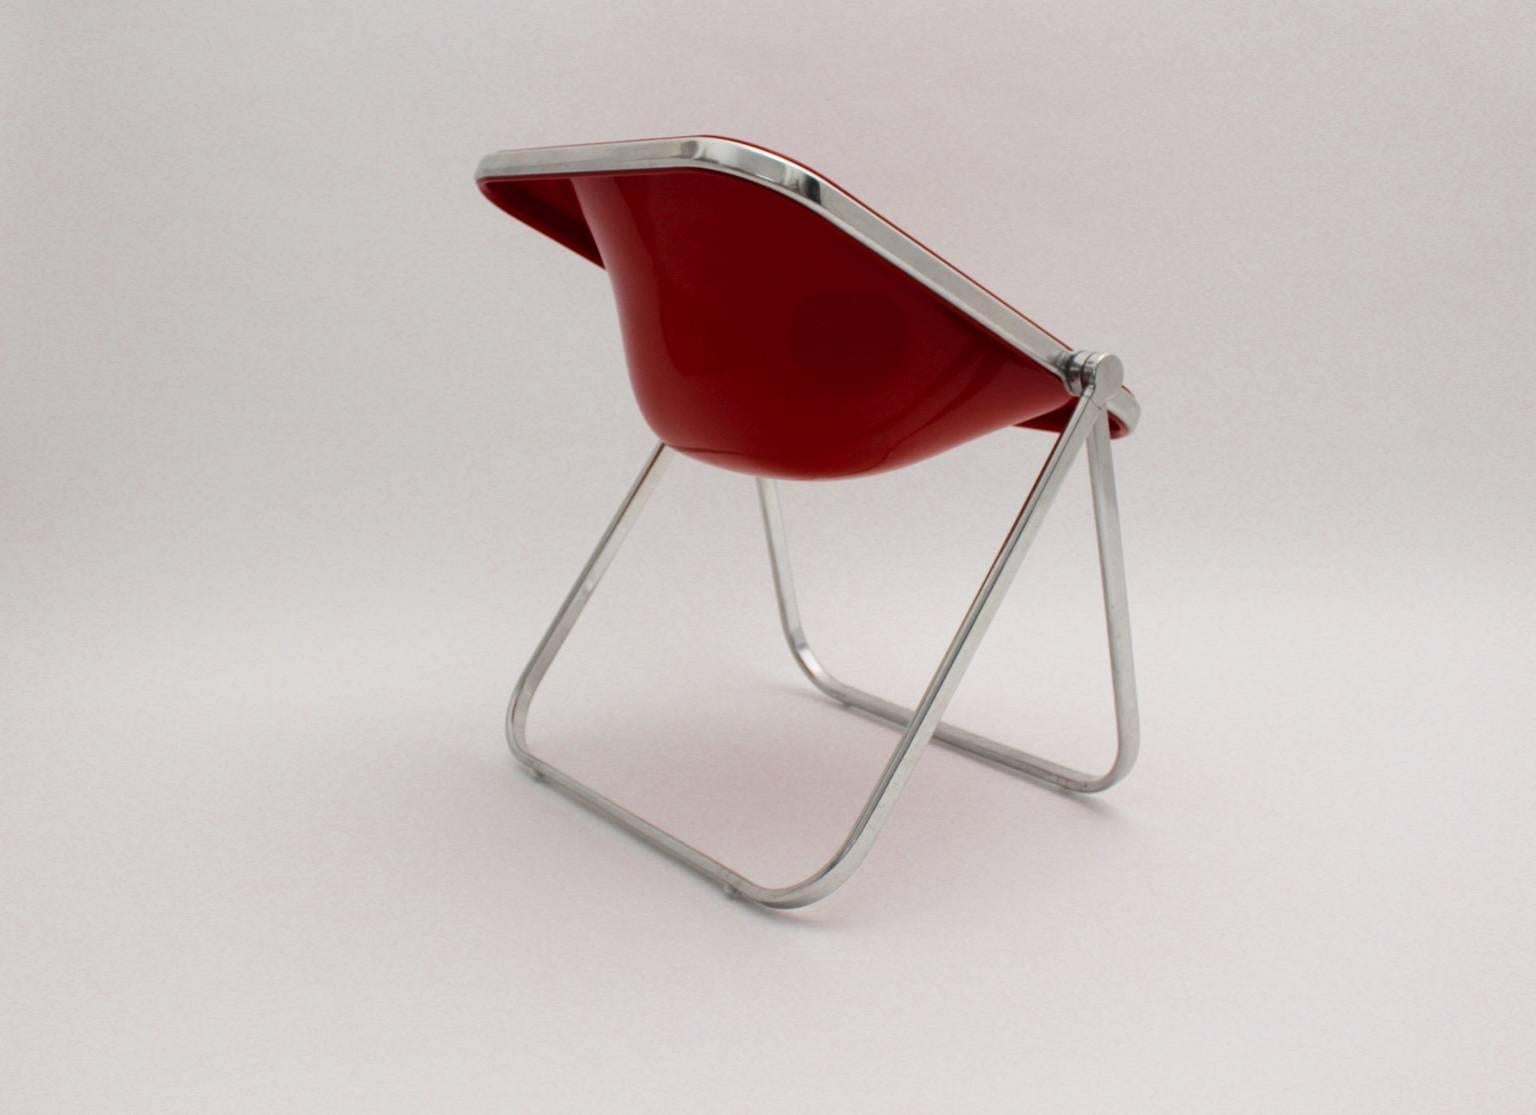 20th Century Giancarlo Piretti Space Age Red Plastic Vintage Armchair Plona 1969, Italy For Sale